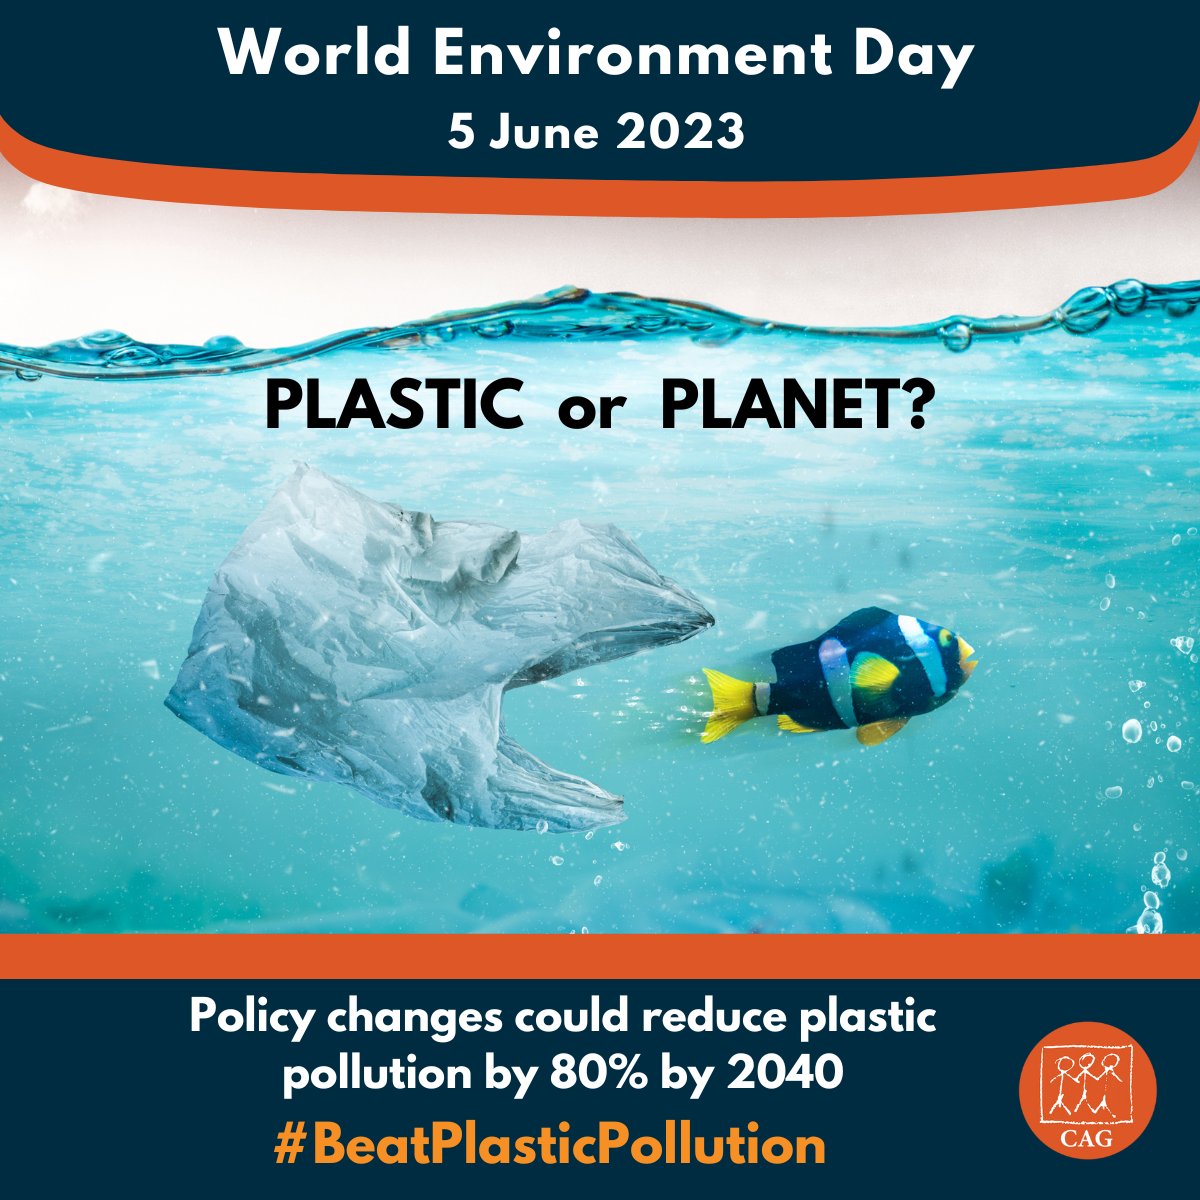 #PlasticPollution is out of control! There is an urgent need for global collaboration and ambitious action to address this threat. #TogetherWeCan #BeatPlasticPollution. Let's unite & demand change for a sustainable future! #INC2 #WorldEnvironmentDay #PlasticTreaty #PlasticsINC